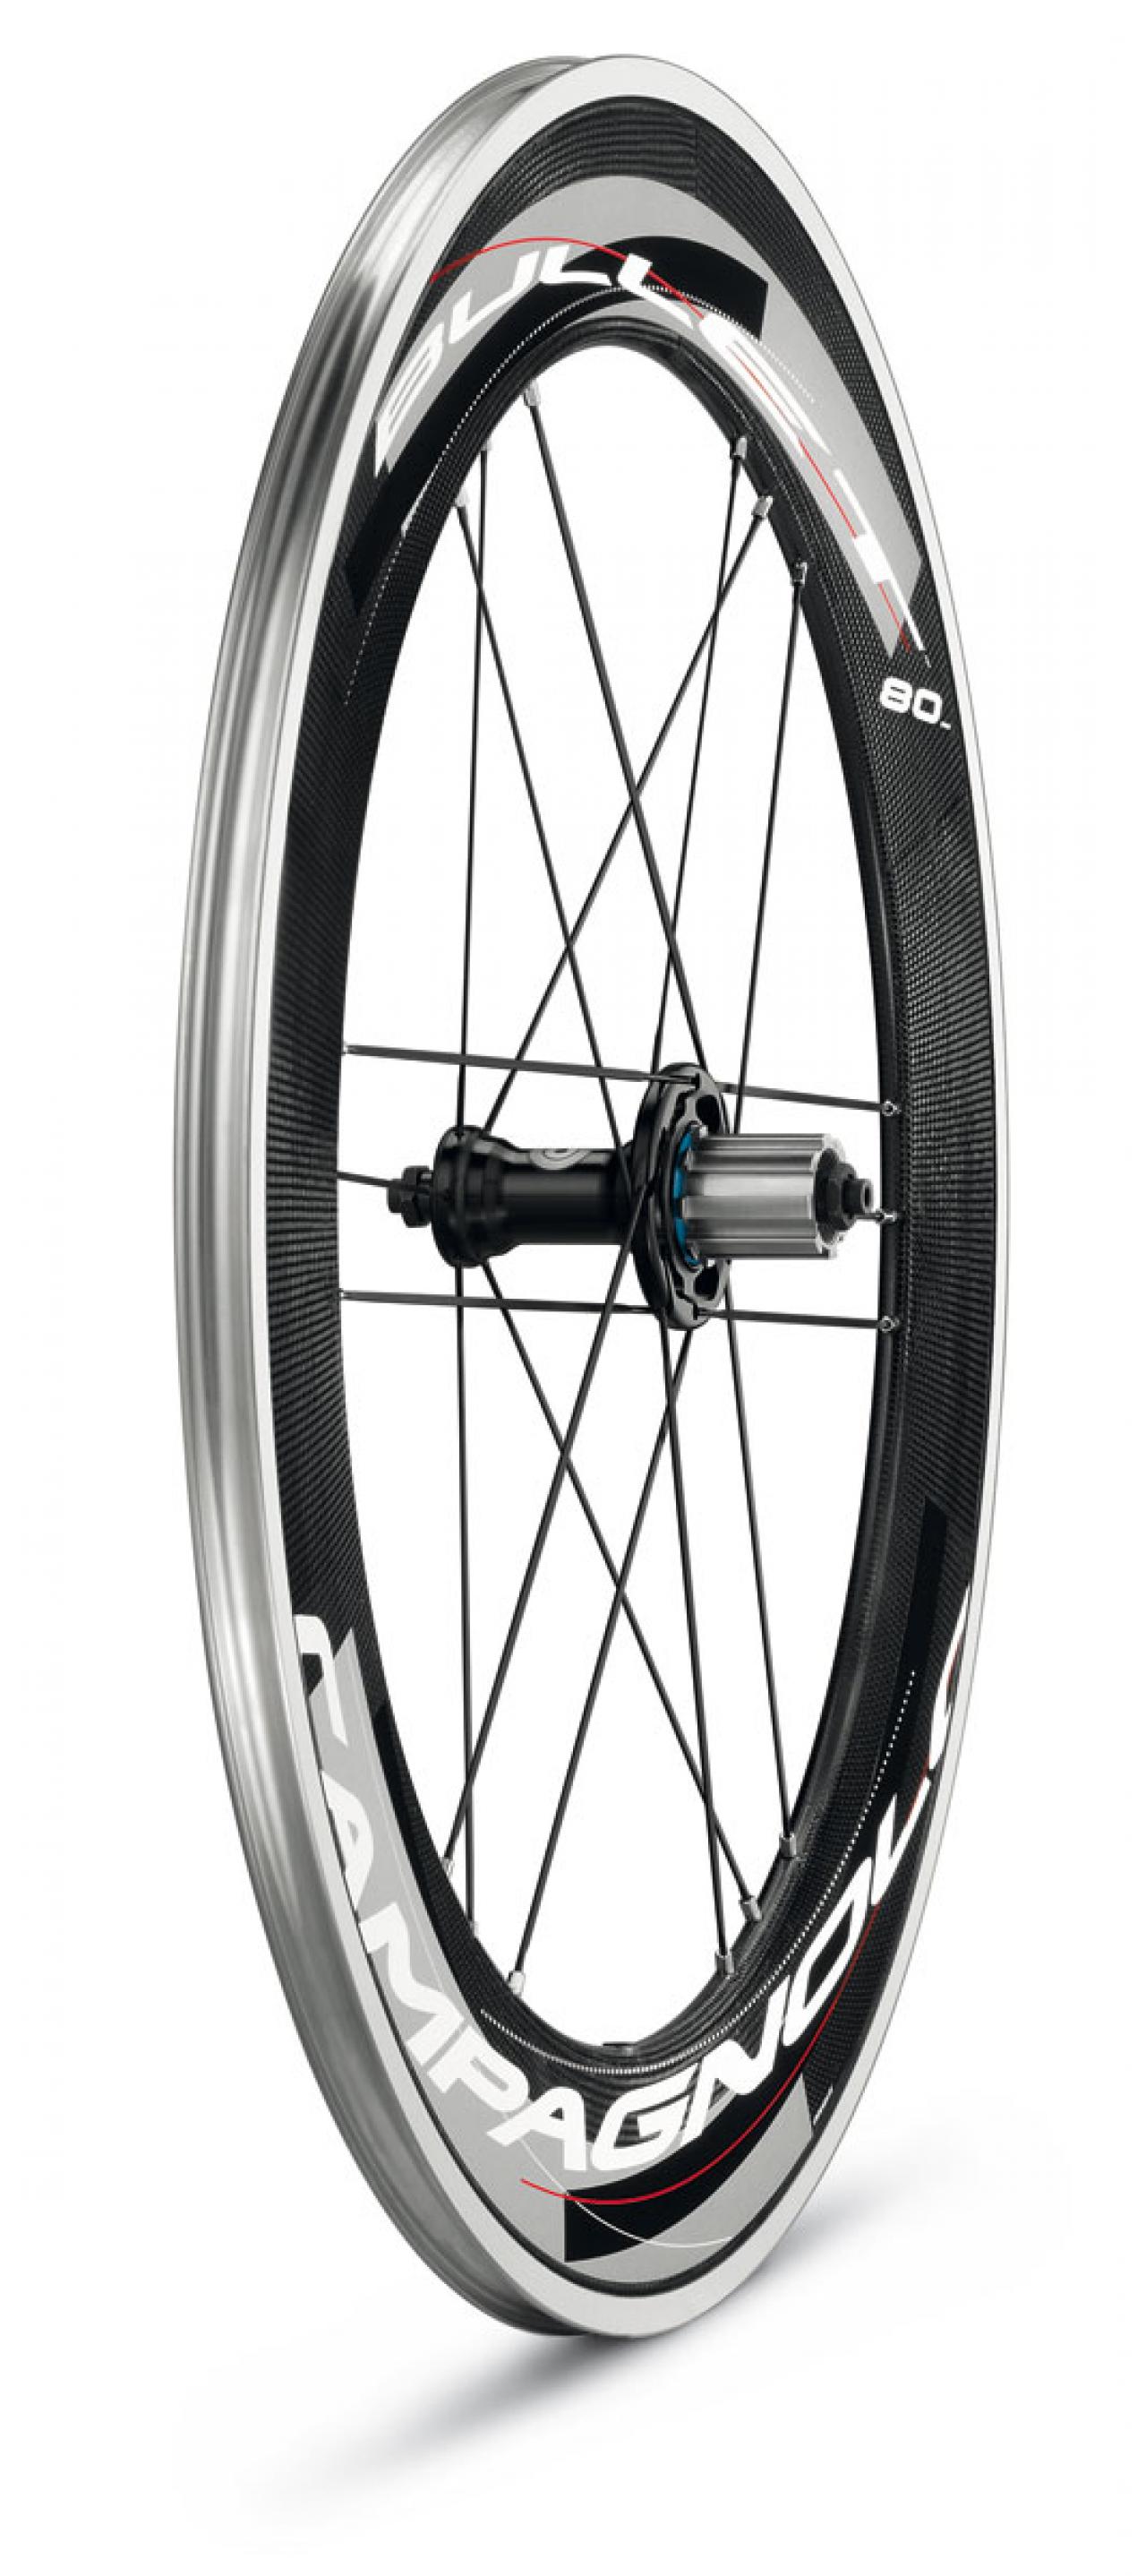 Campagnolo launches 2012 wheel lineup starring new high end Bullet 